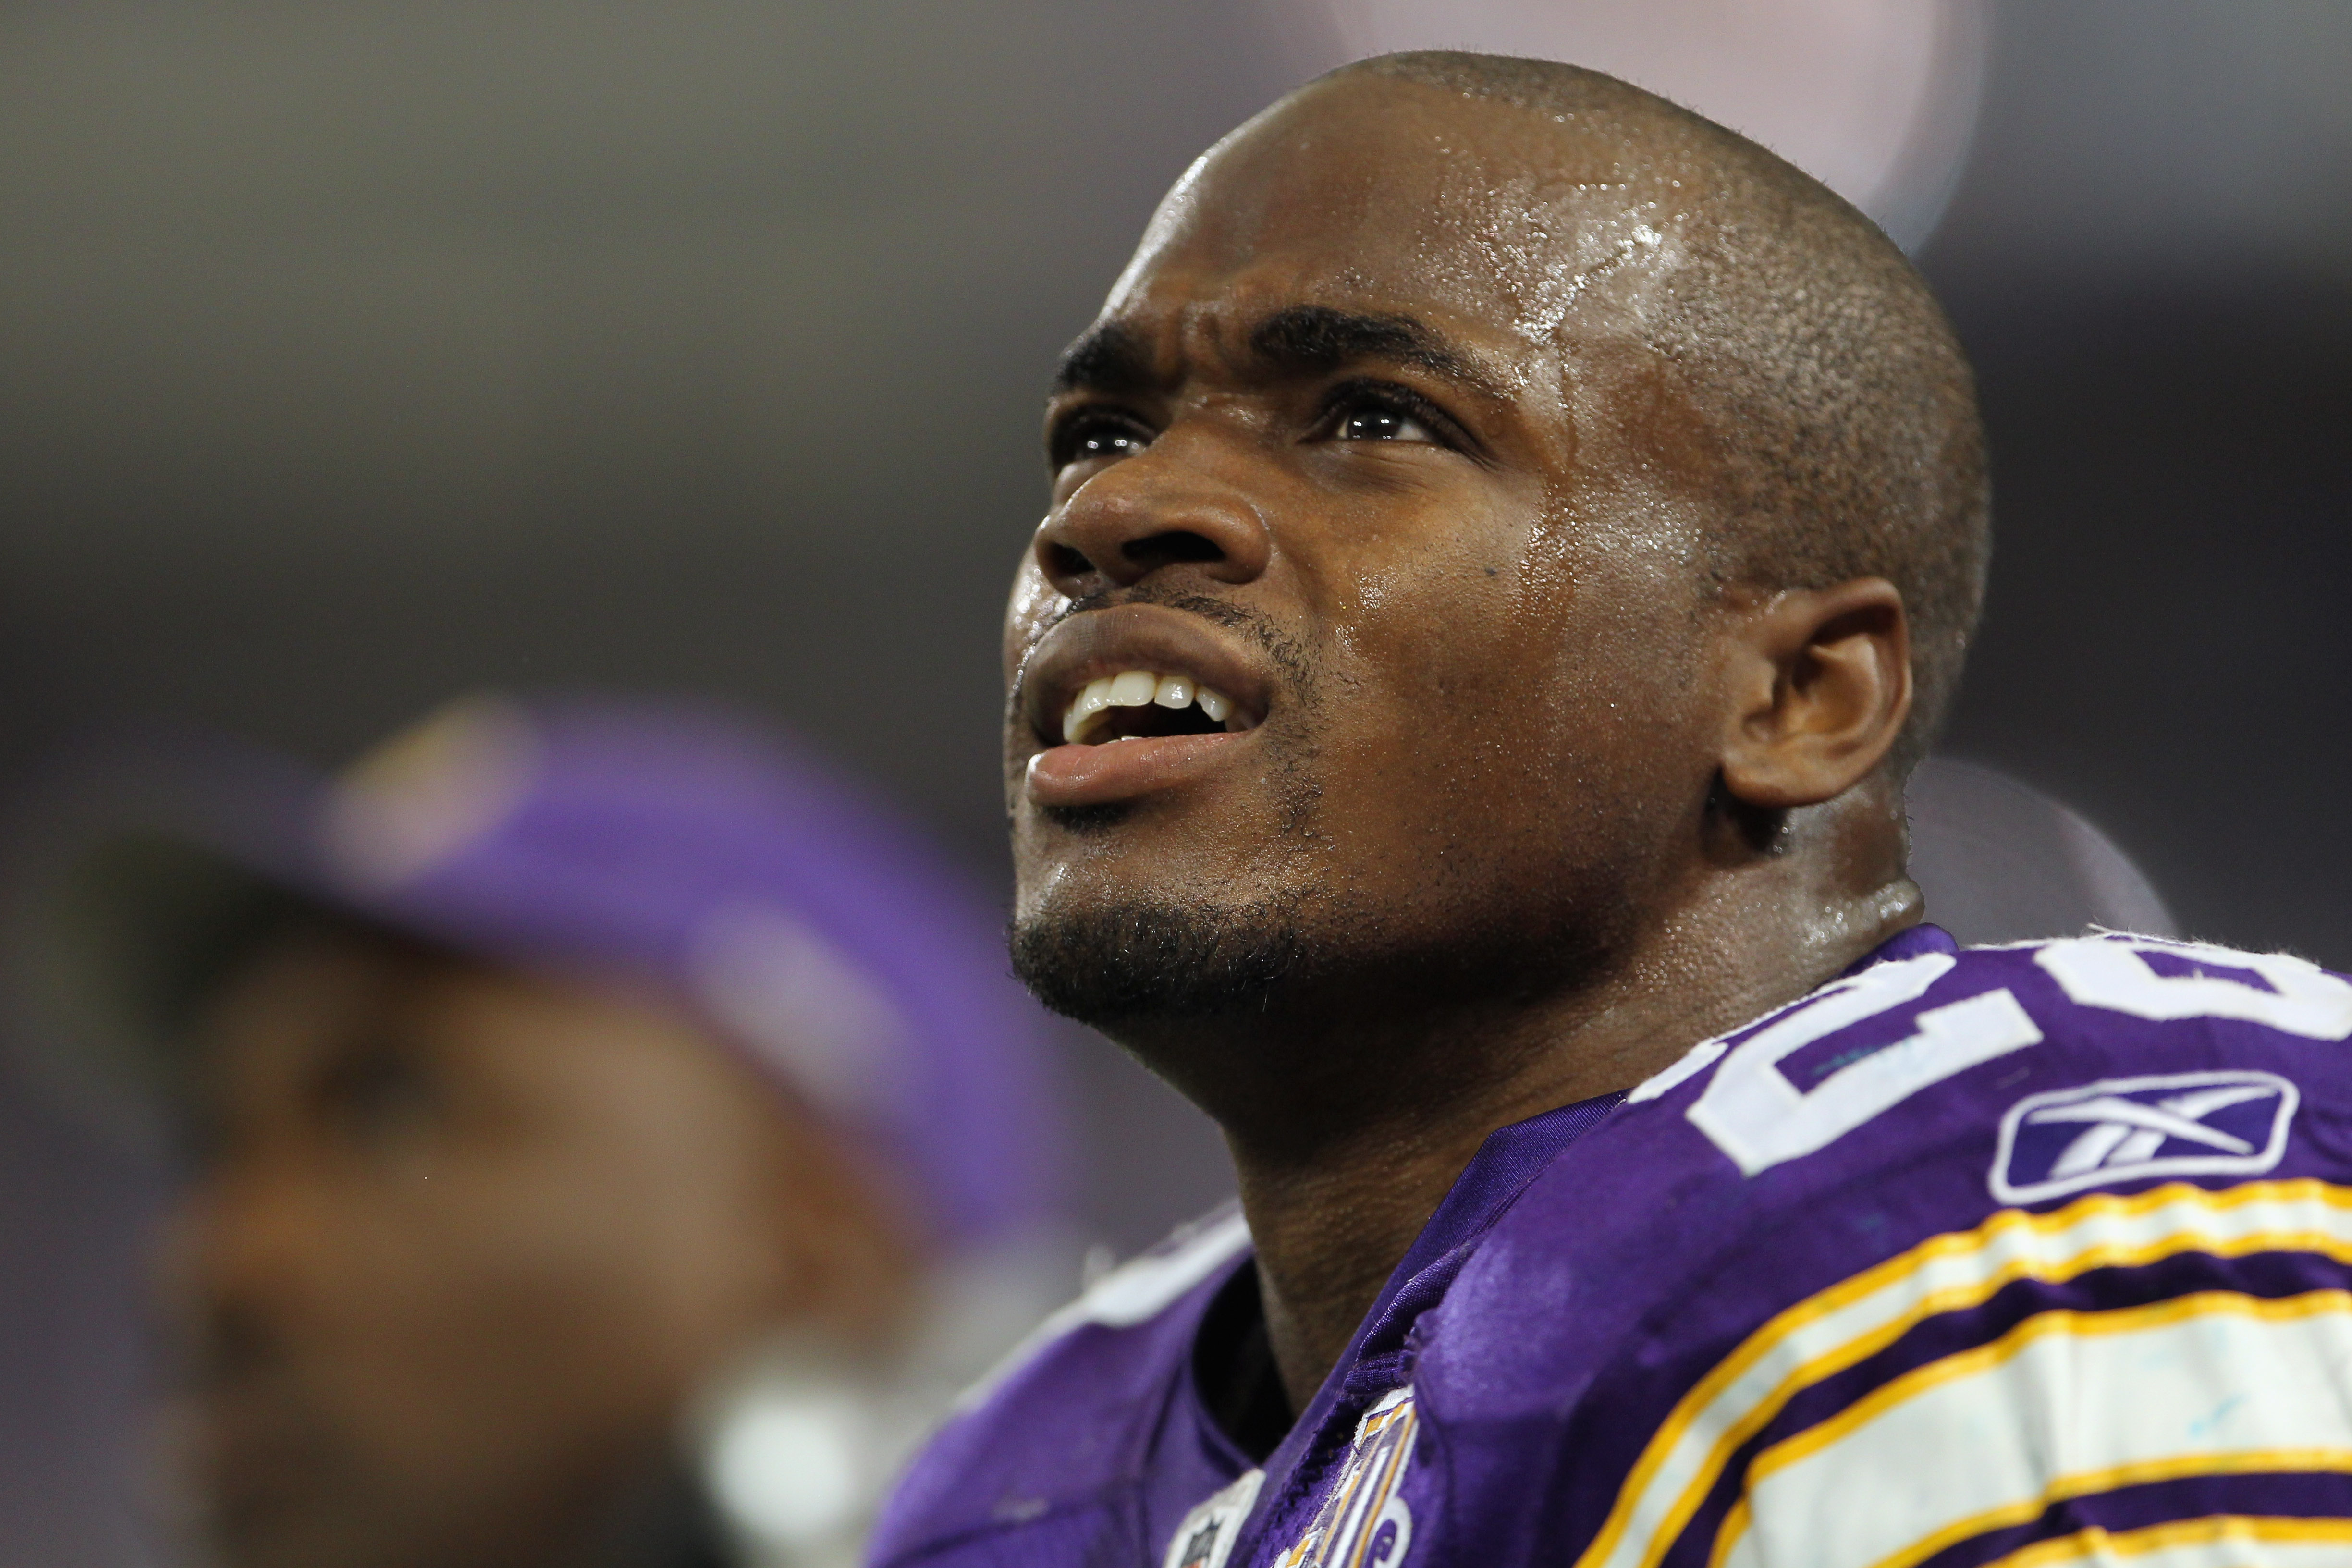 MINNEAPOLIS - SEPTEMBER 19:  Adrian Peterson #28 of the Minnesota Vikings watches a replay on the scoreboard during the game against the Miami Dolphins on September 19, 2010 at Hubert H. Humphrey Metrodome in Minneapolis, Minnesota.  (Photo by Jamie Squir